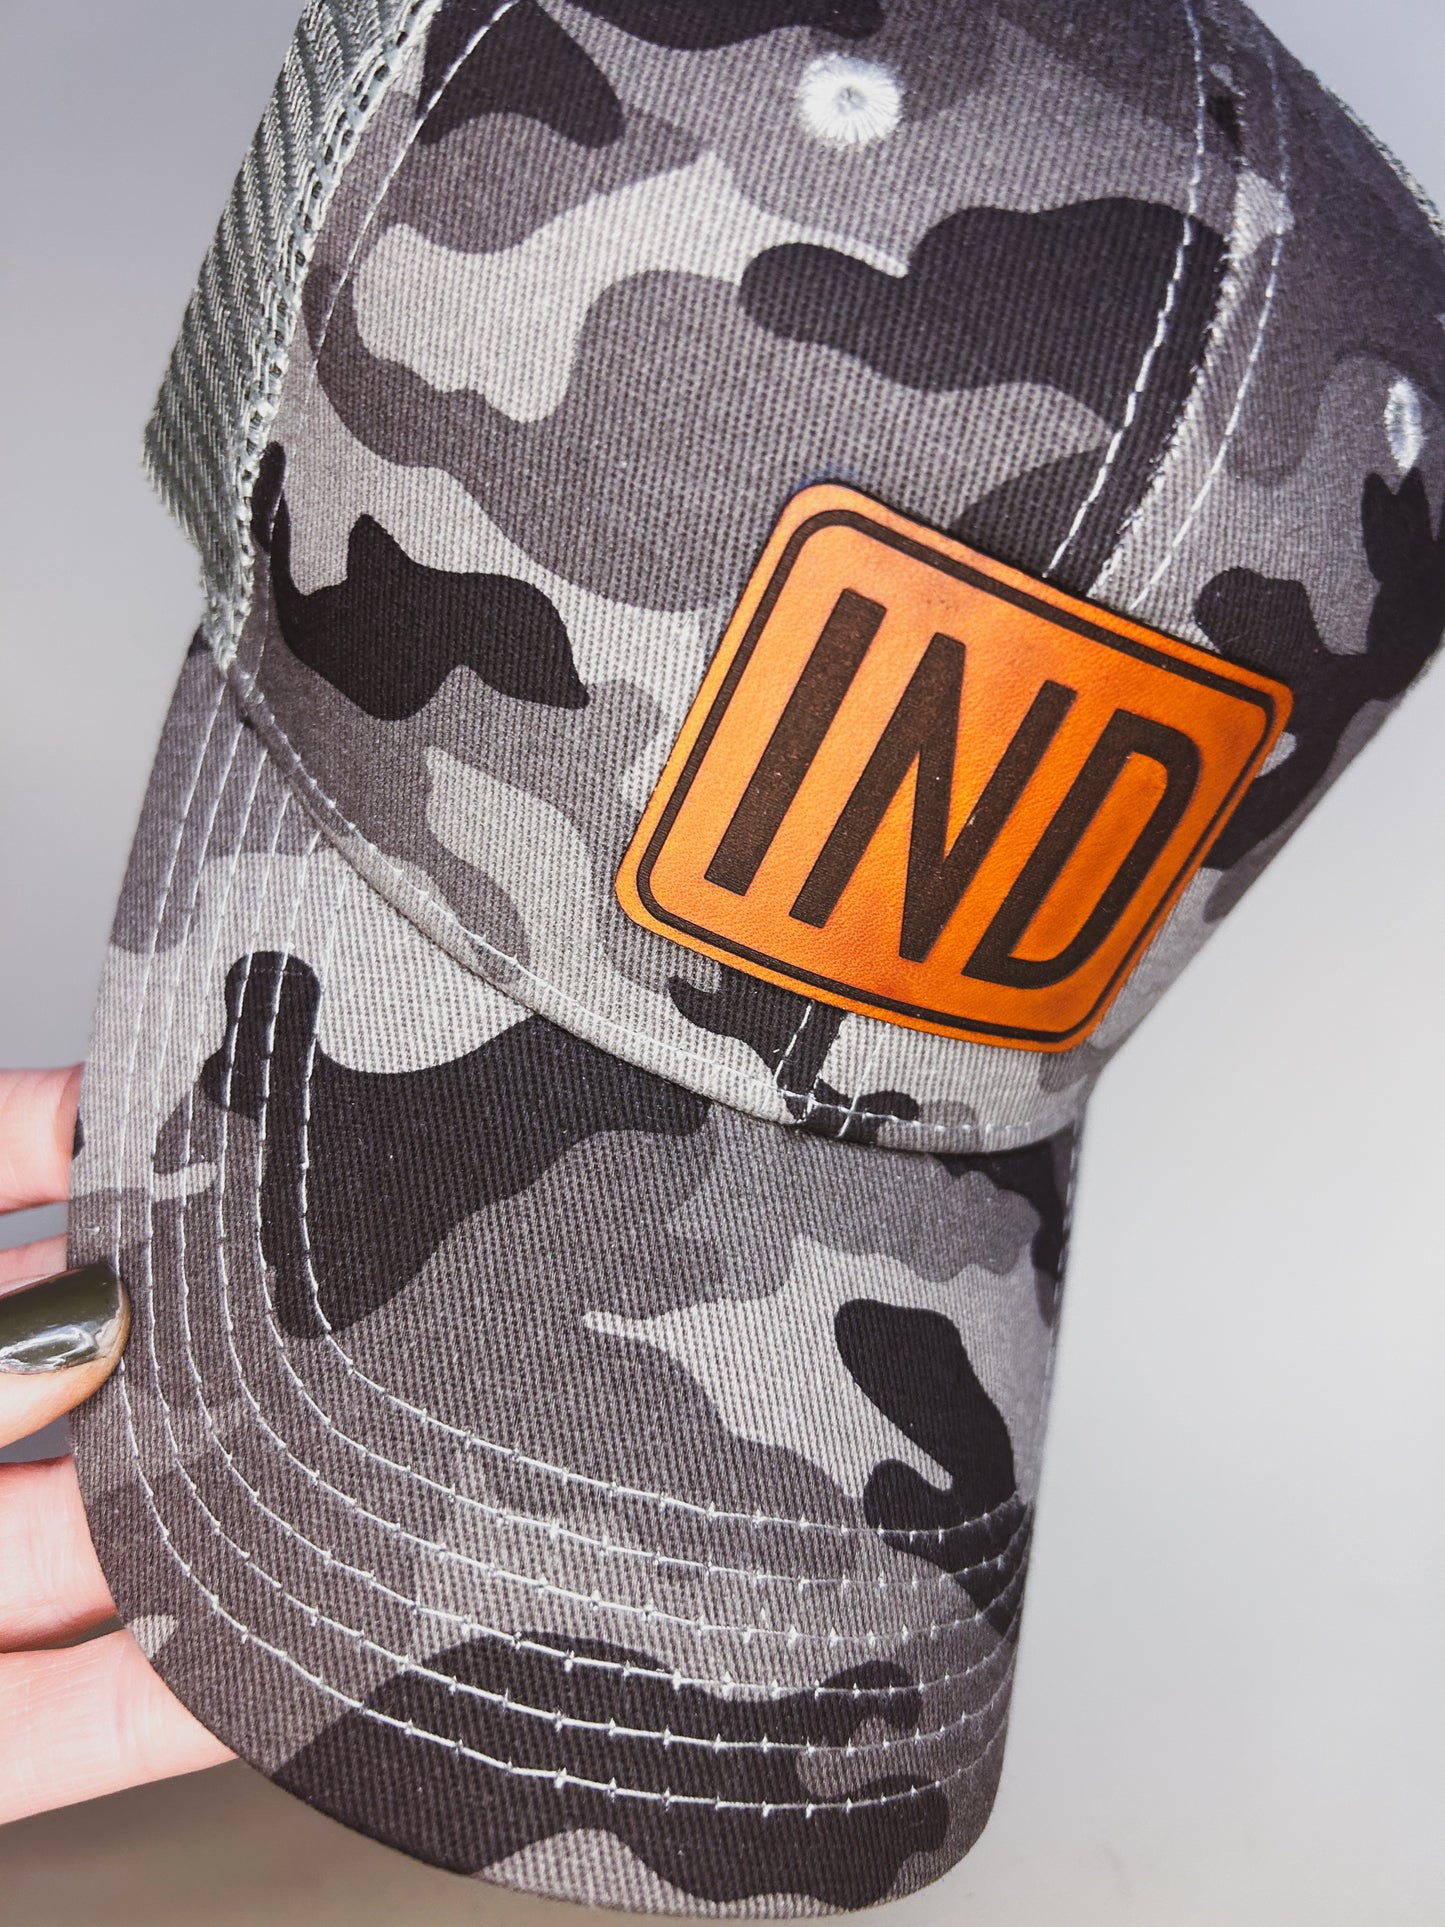 IND Patch on Gray Camo Baseball Hat